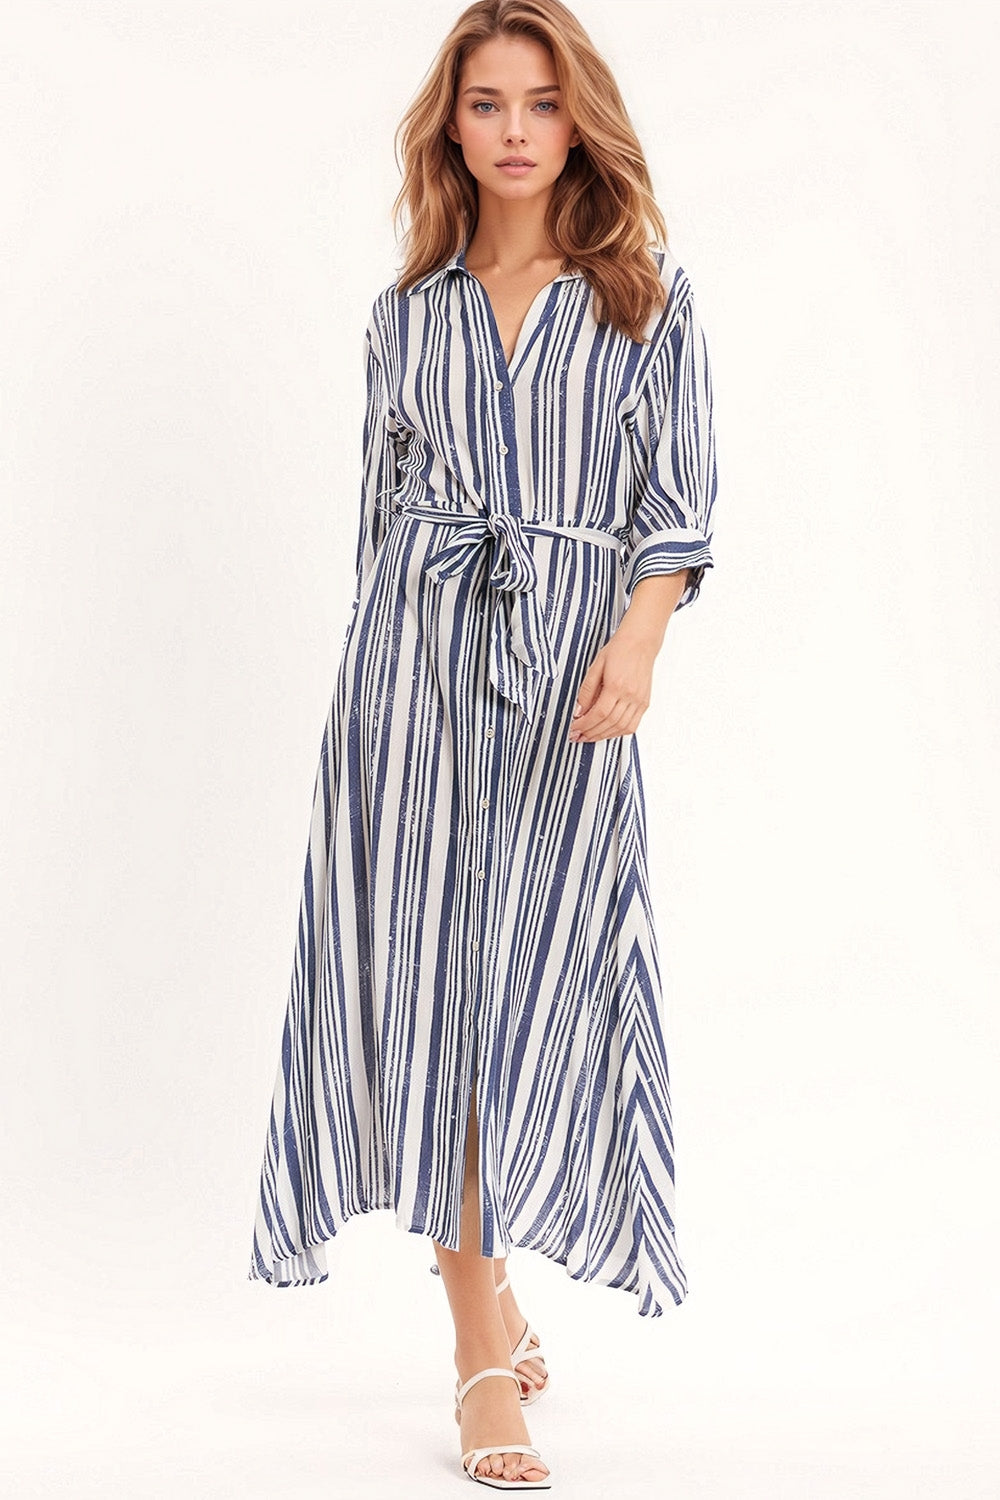 Q2 Striped Maxi Shirt Dress With 3/4 Sleeve and Belt in Blue and White